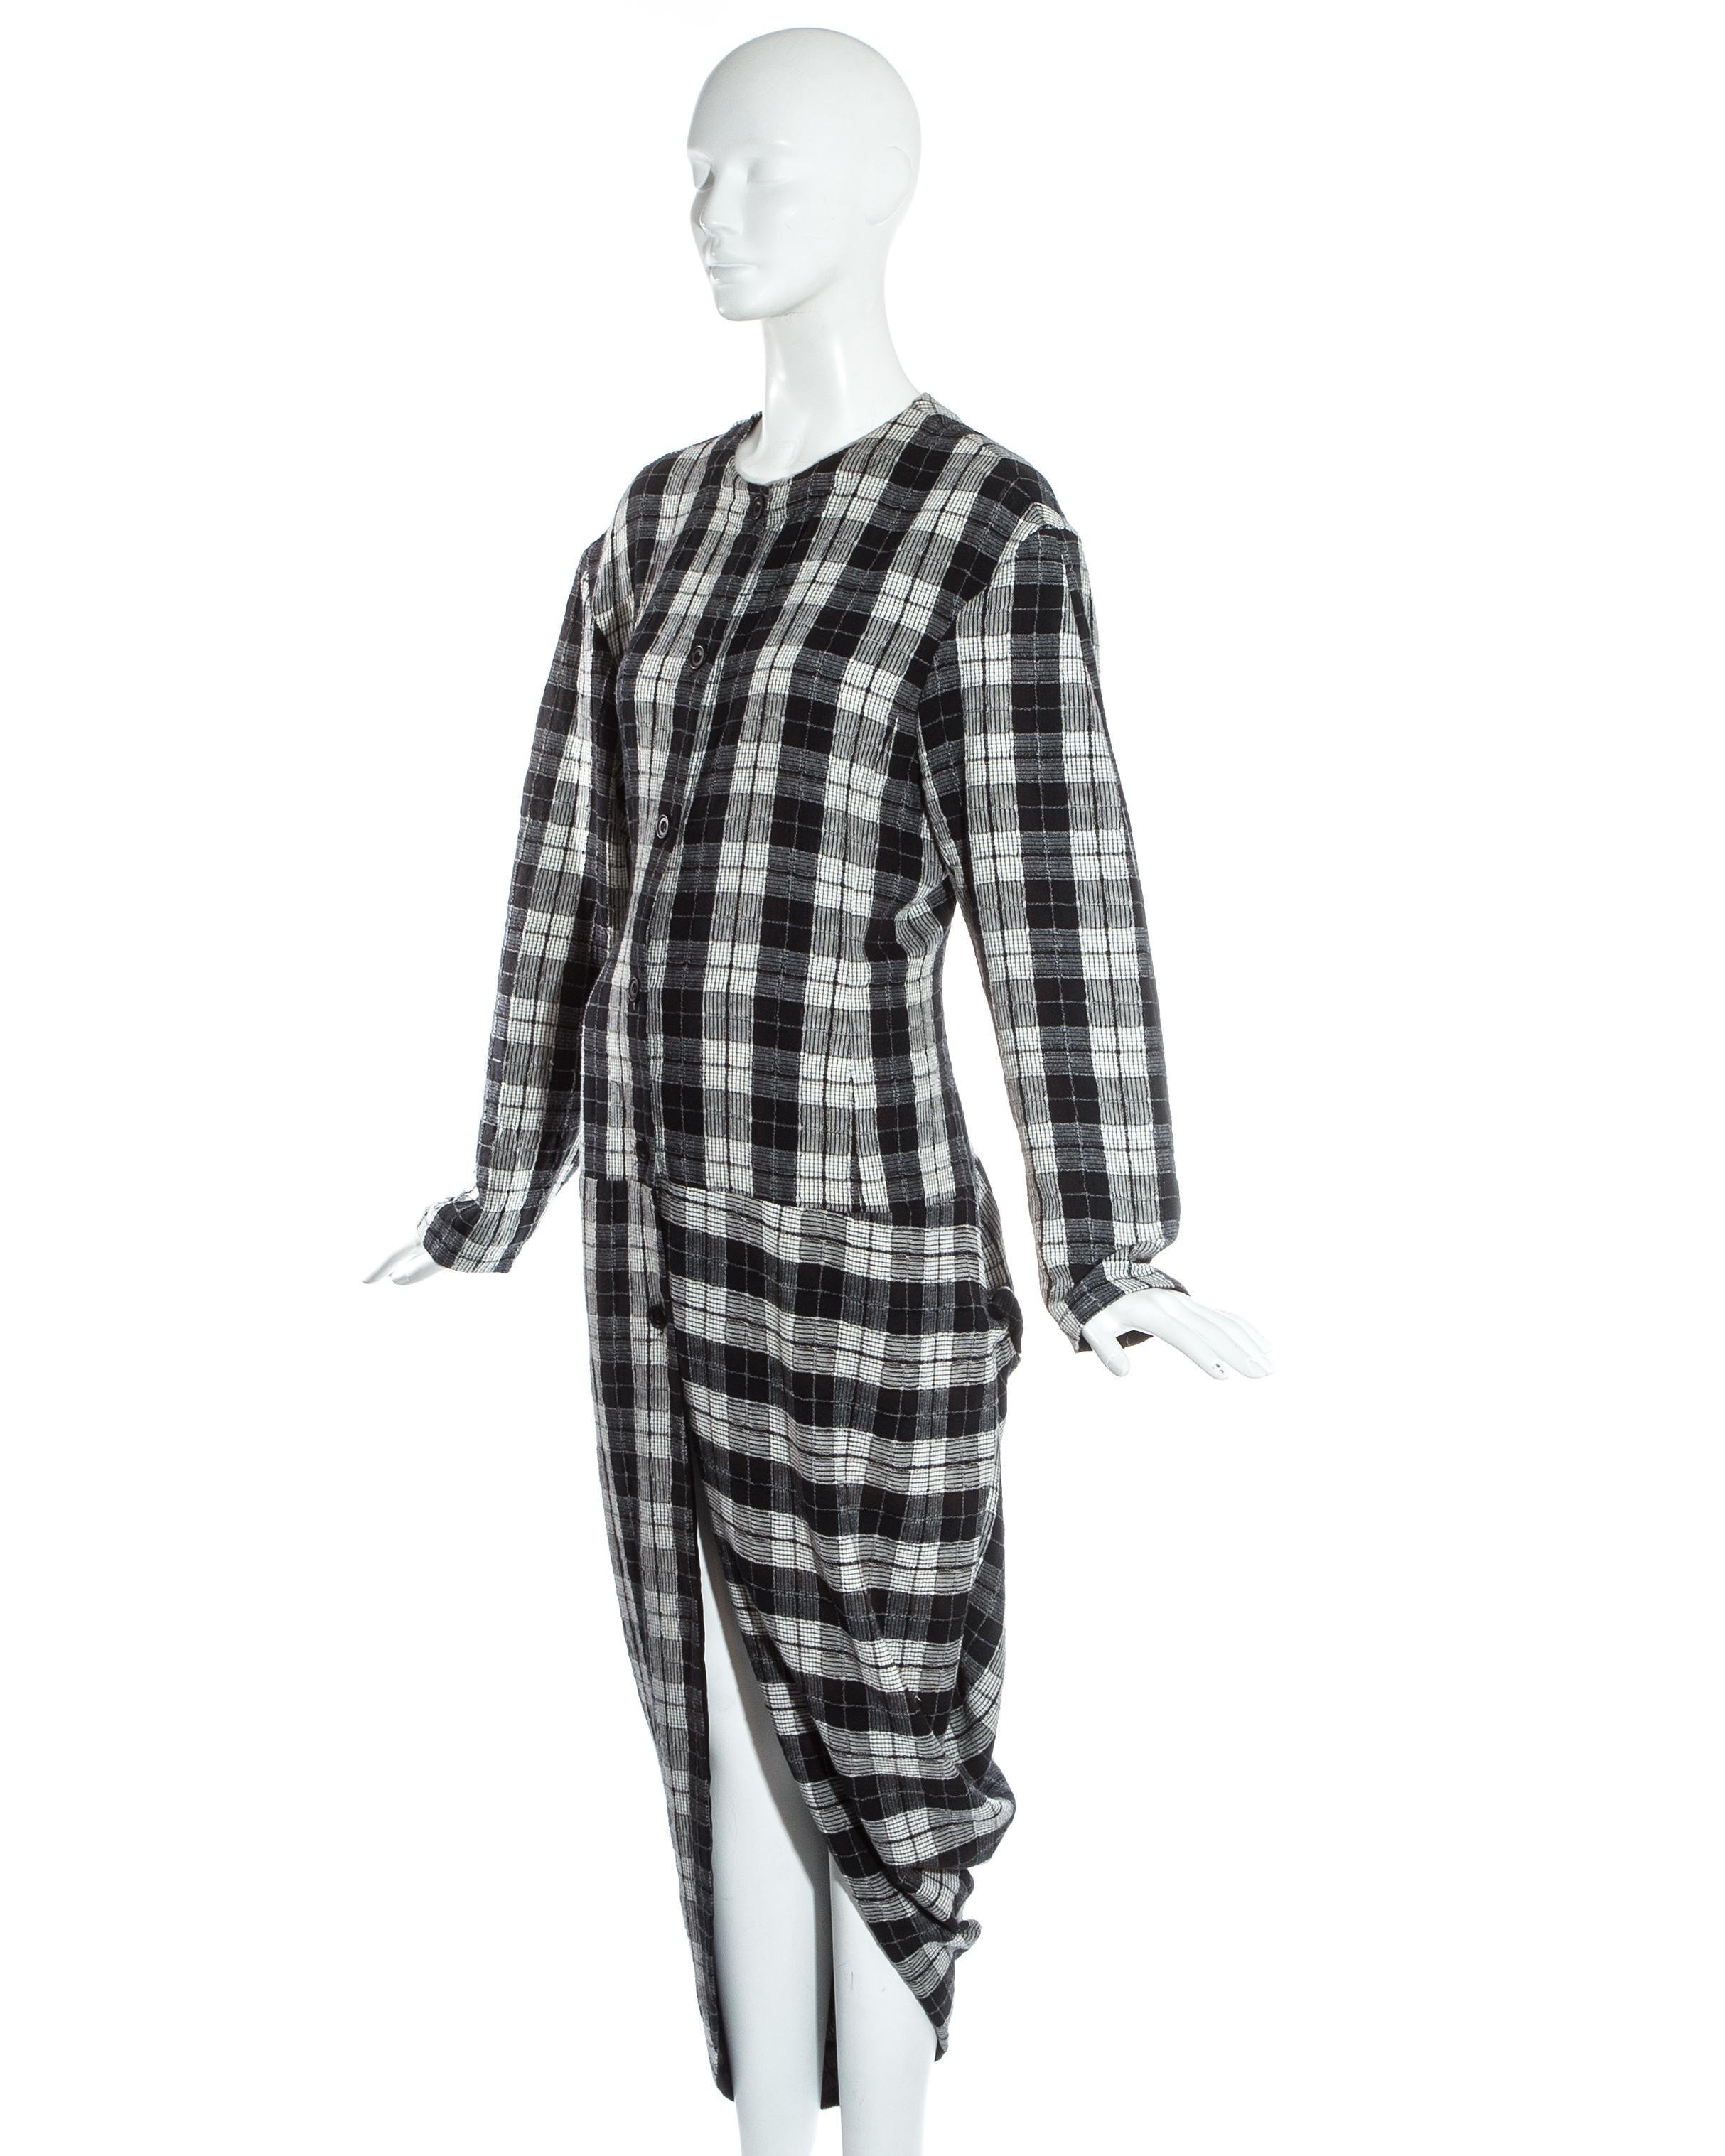 John Galliano; black and white plaid cotton bustled shirt dress. Wide cut shoulders with padding, button fastenings down centre front, draped skirt simulating a bustle, fitted waist and a signature Galliano rolled 'rose' at the hip. 

Fall-Winter